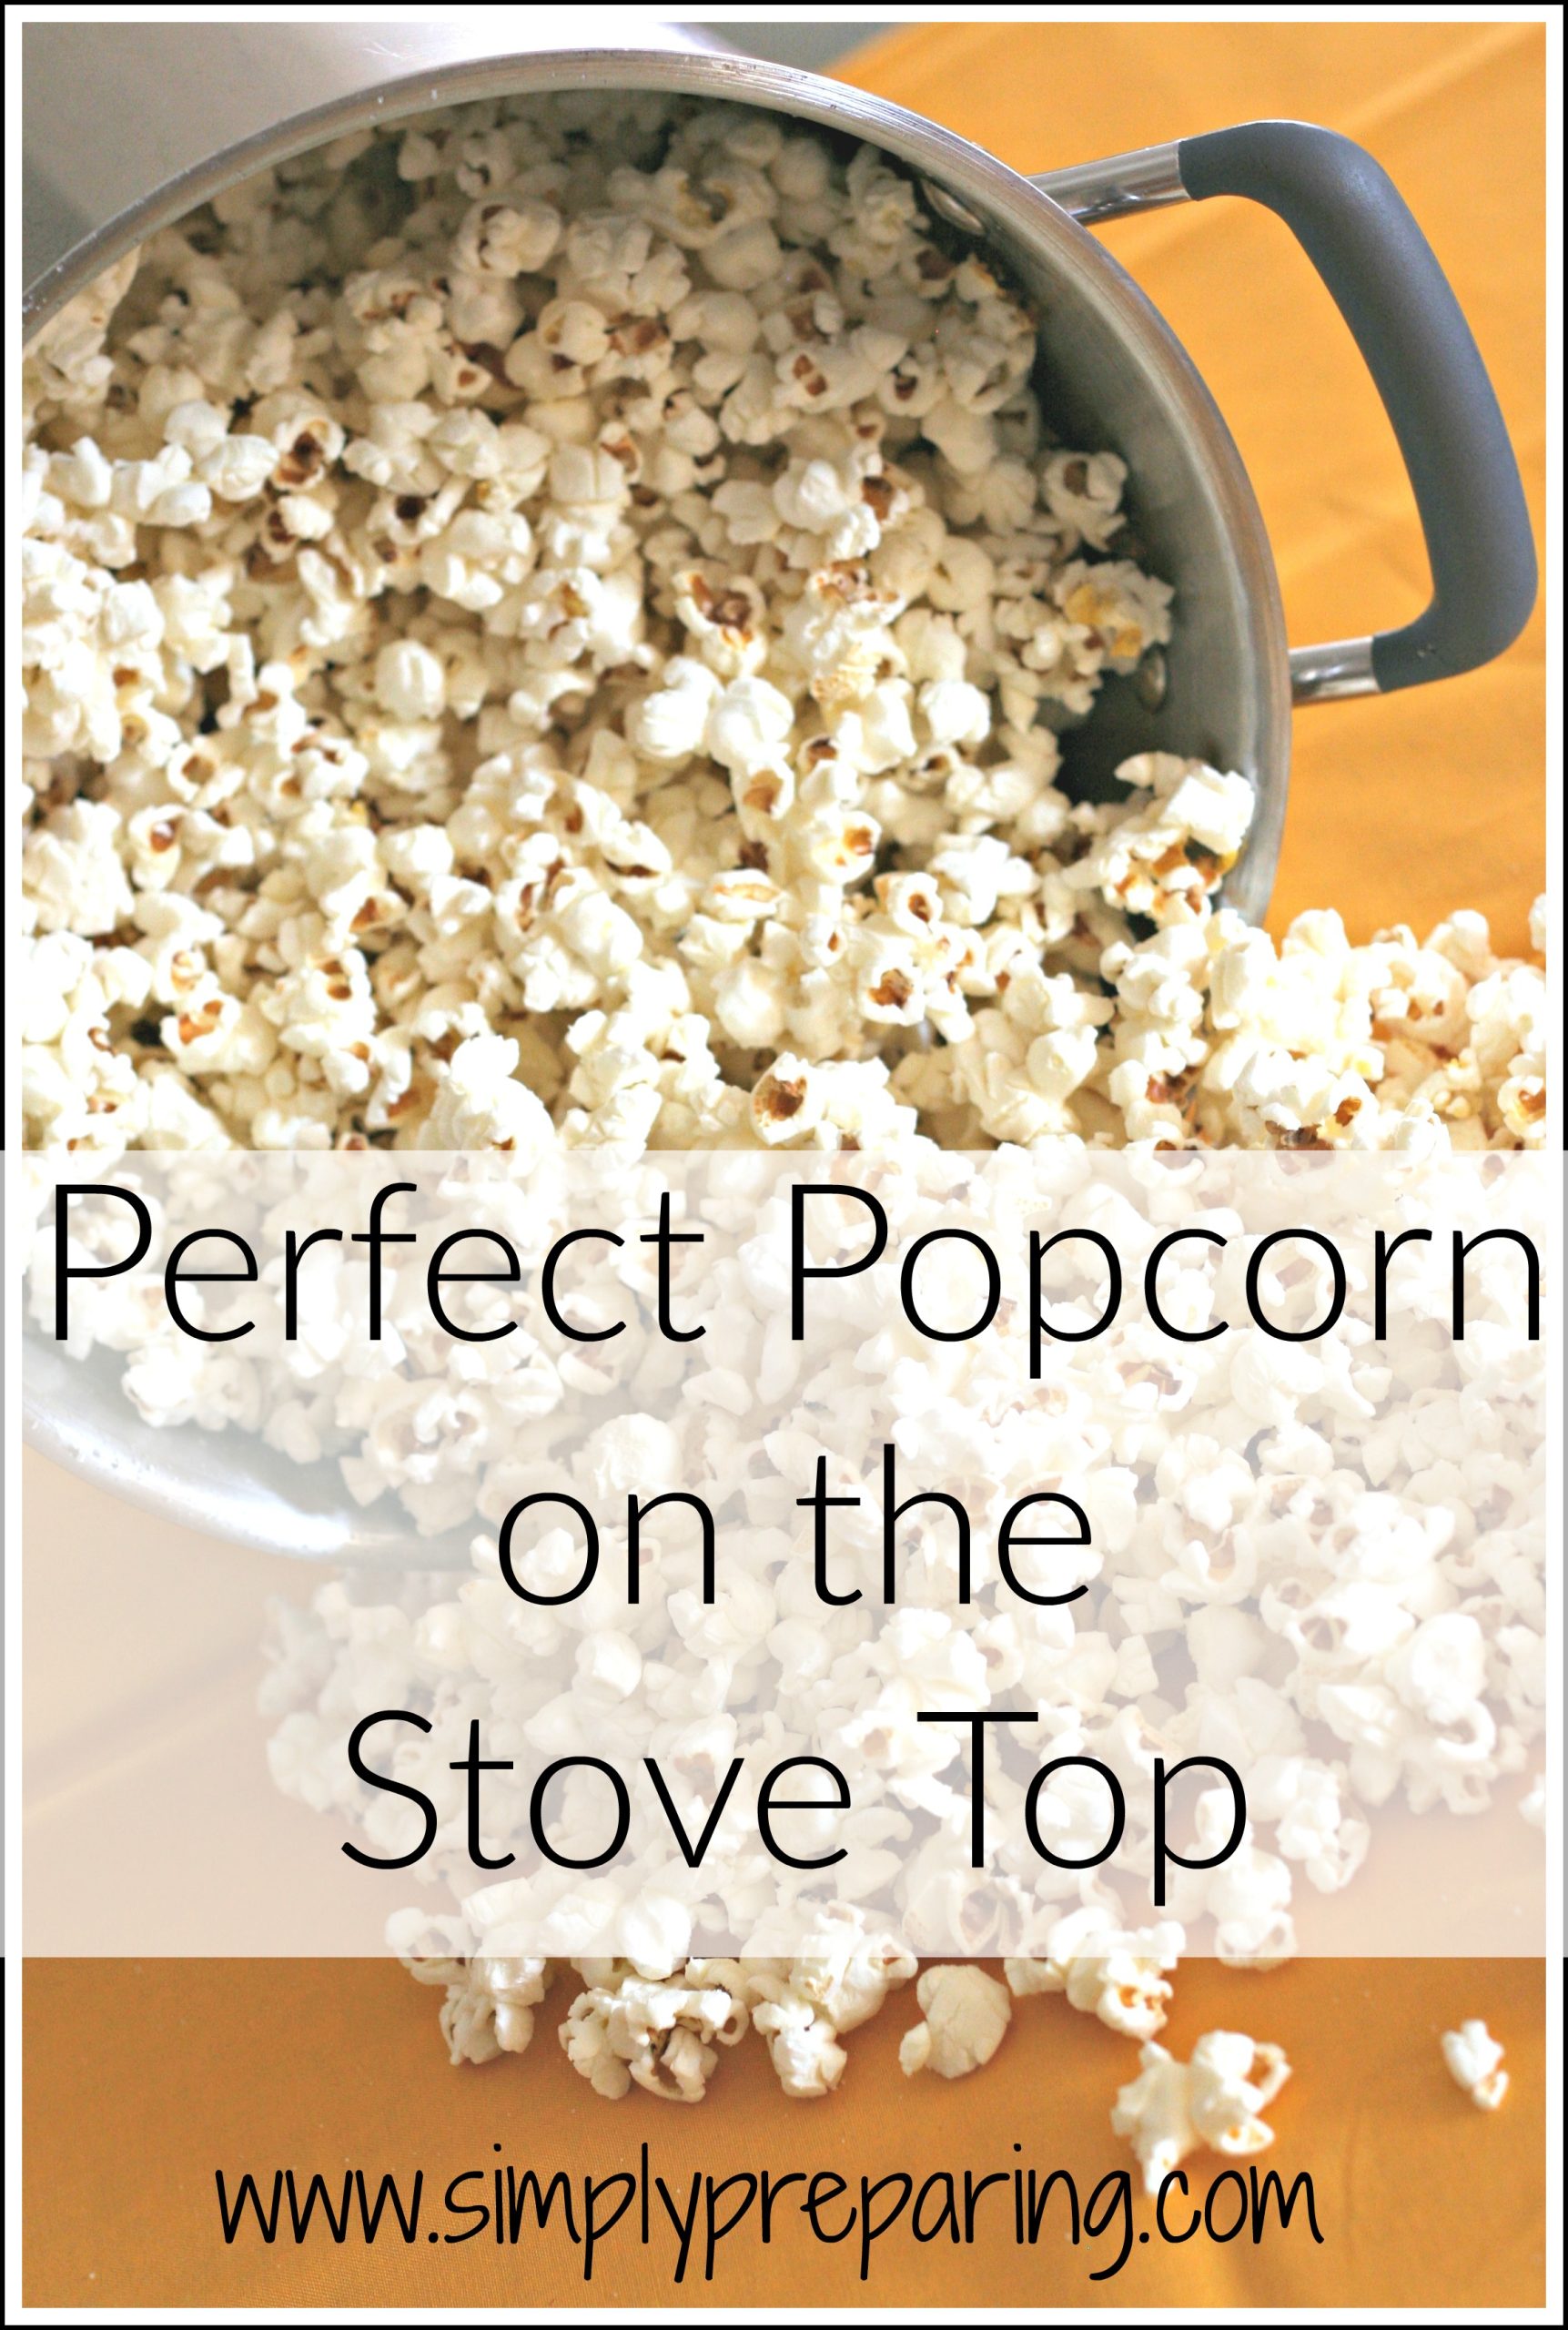 Making stove popped pocorn in oil is easy. It's a favorite snack for movie nights. It's a perfect long term storage item for your food storage too!